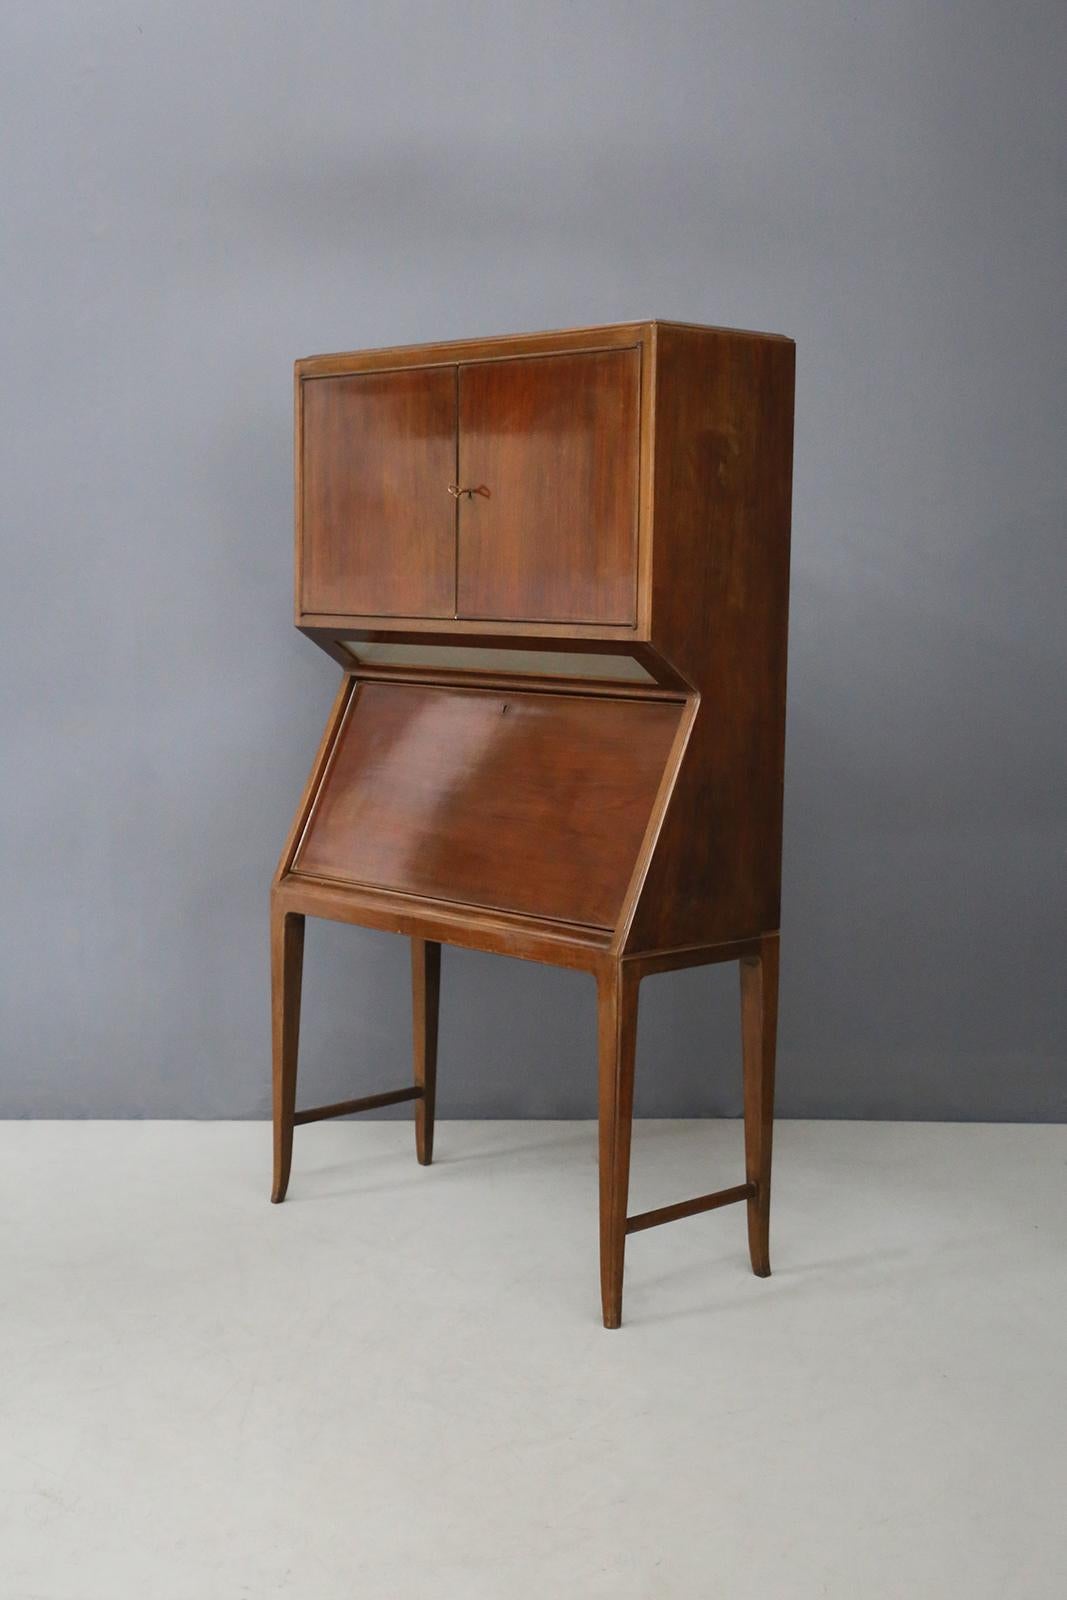 Folding bar cabinet, Italian manufacture of the 1950s. Beautiful Italian walnut and maple of the 1950s.
A piece of furniture made up of many distinctive elements for its different uses. In the first upper part of the cabinet there are two opening